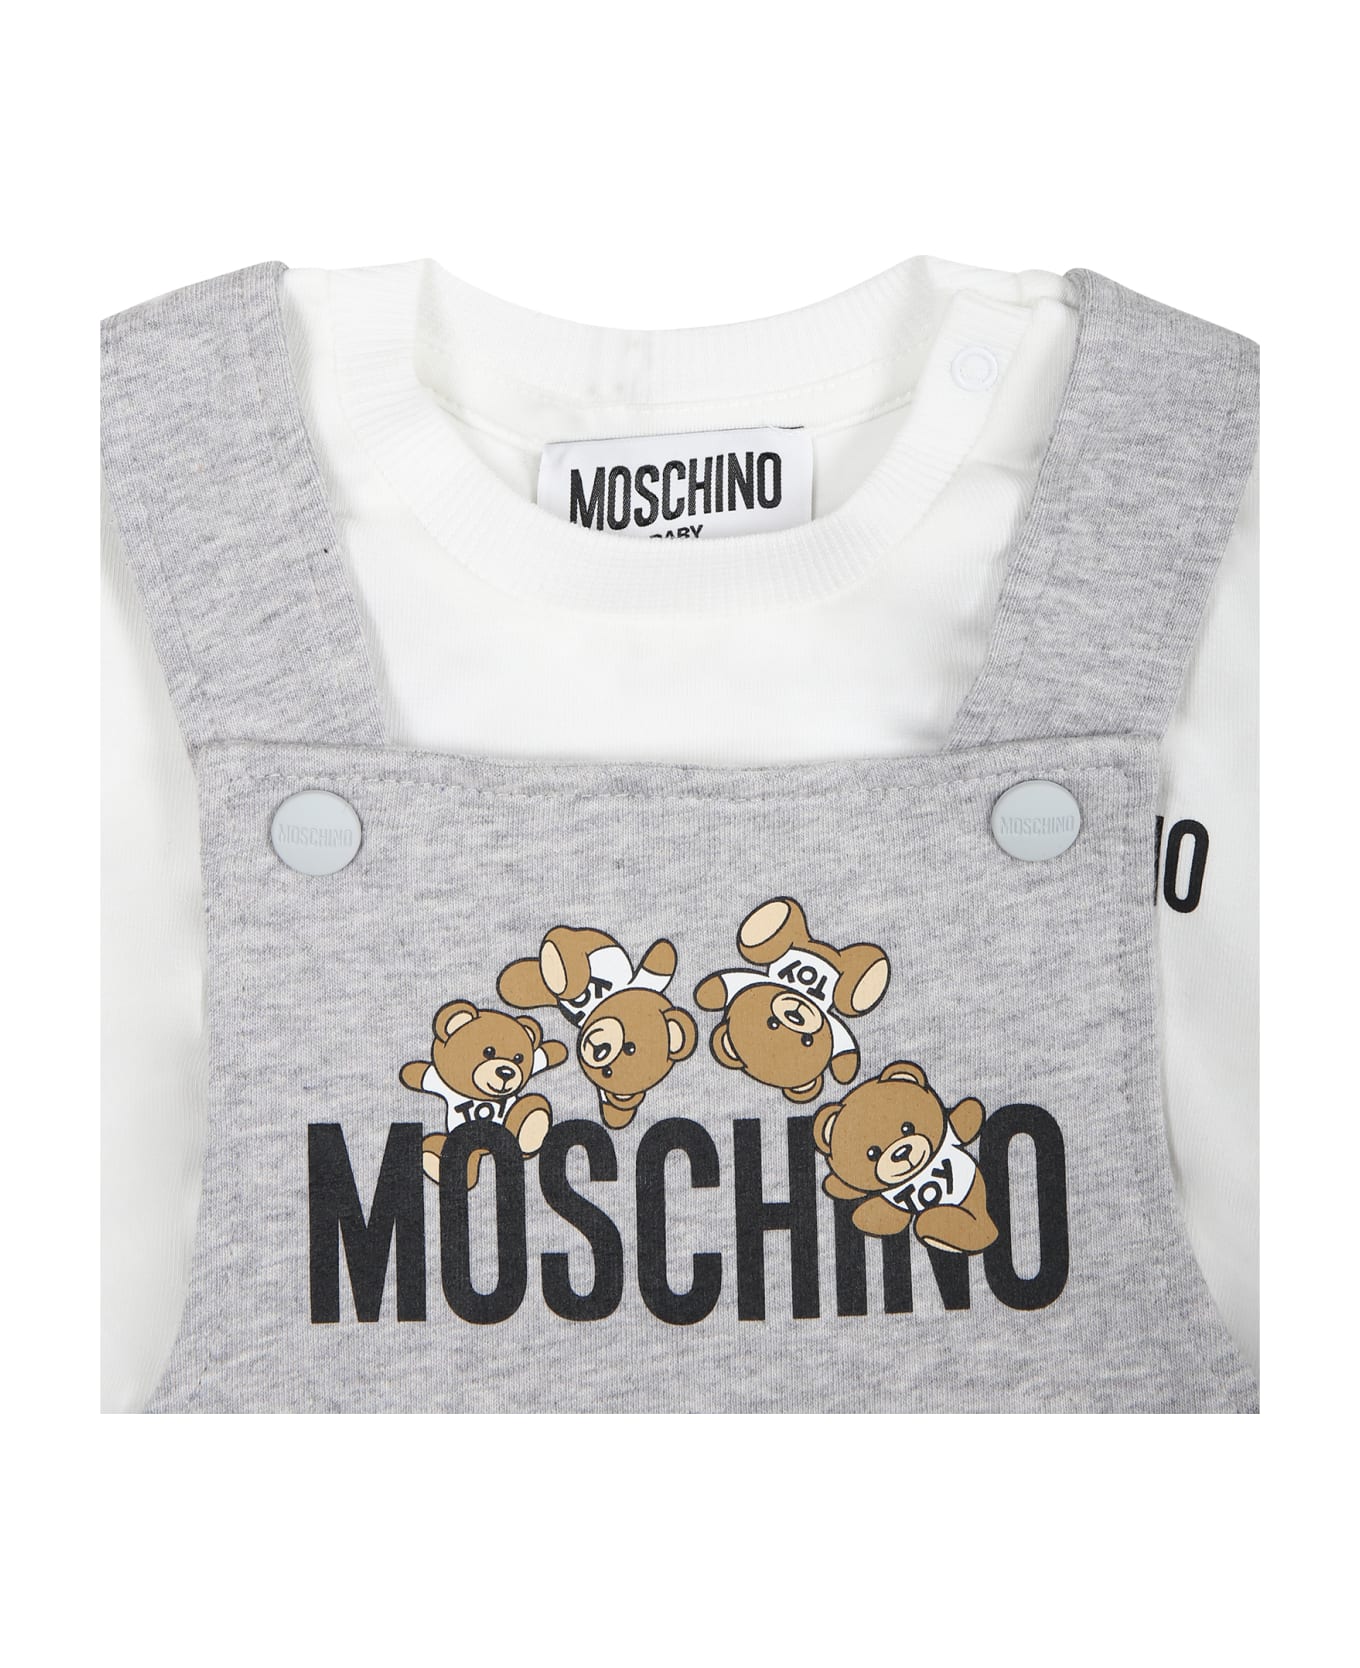 Moschino Gray Dungarees For Baby Boy With Teddy Bear - Grey